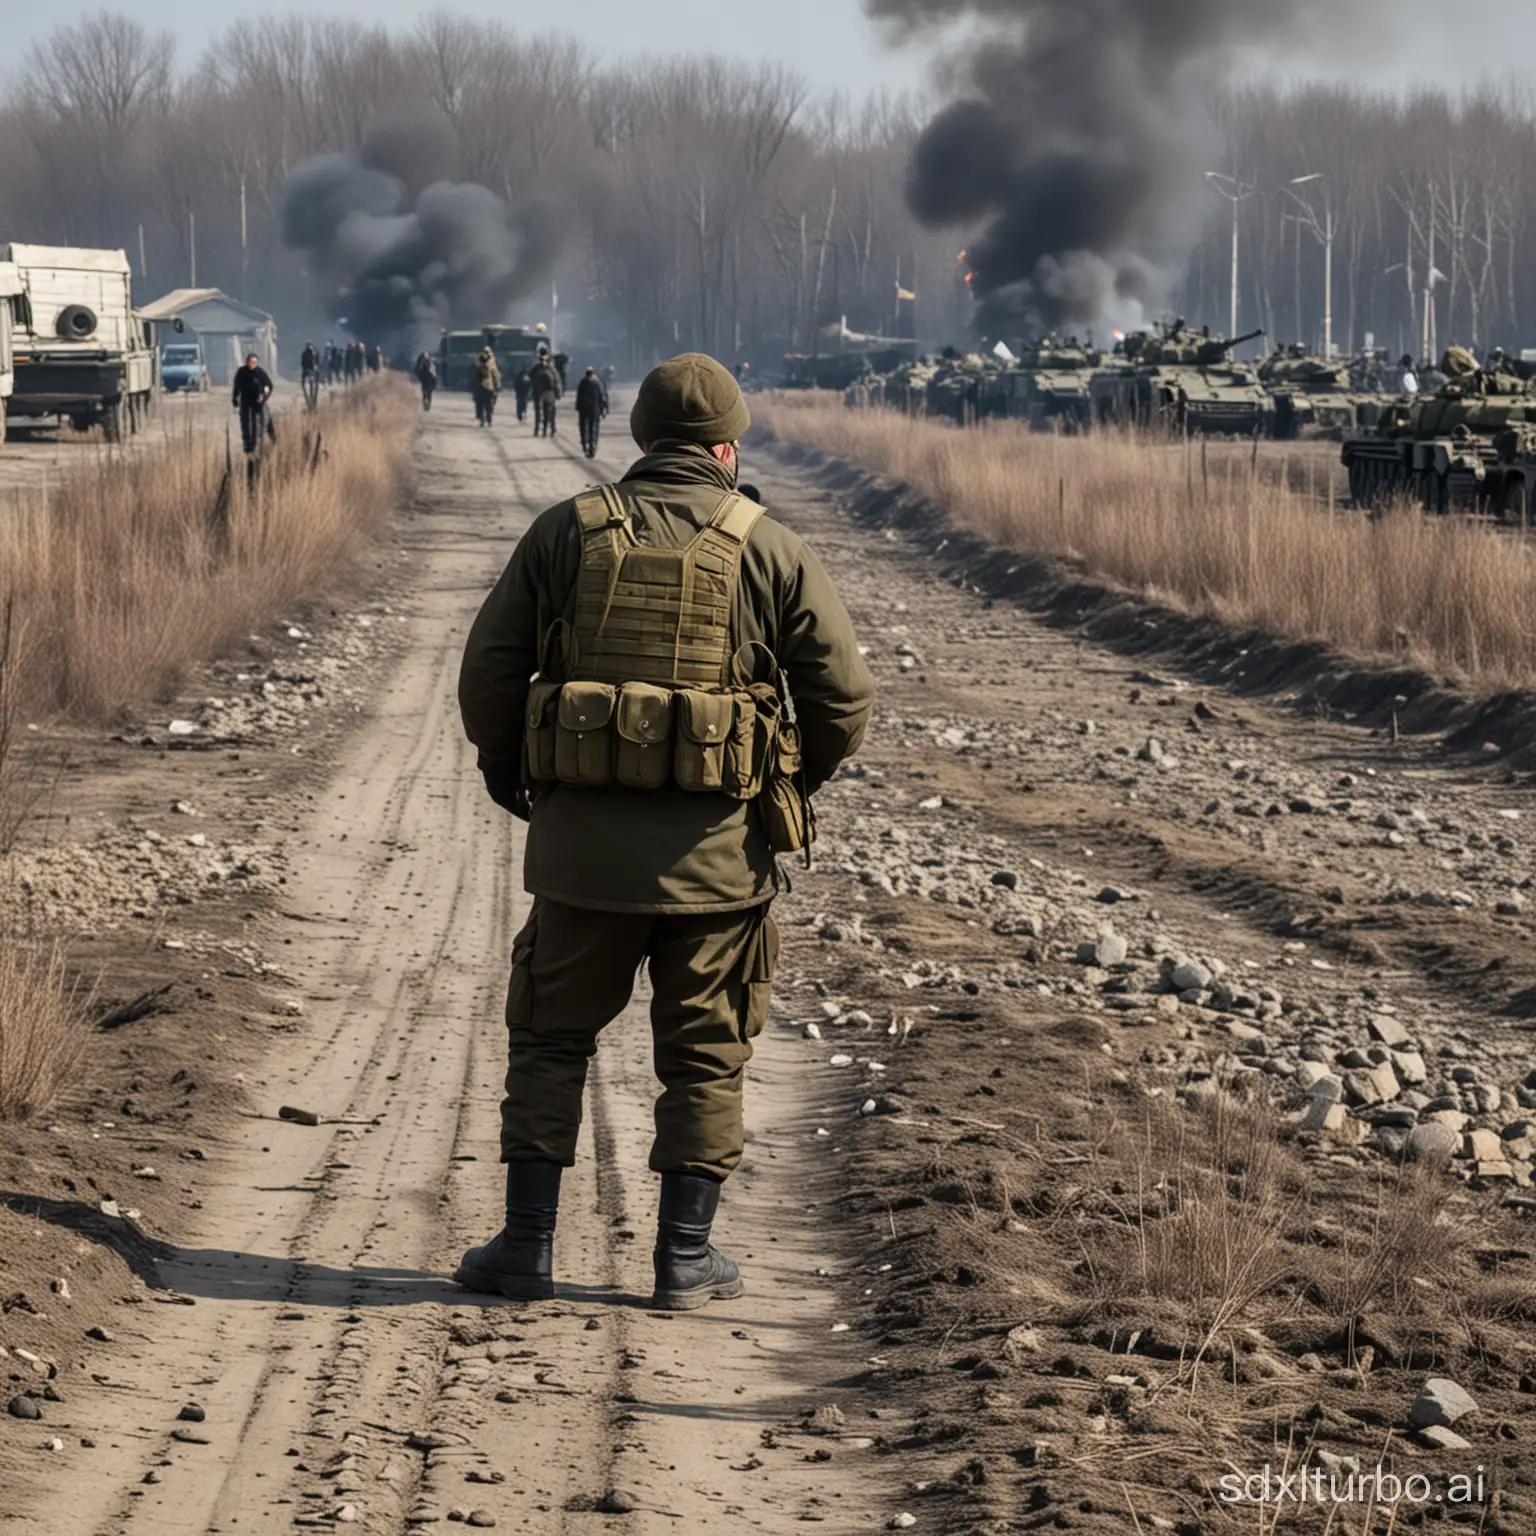 Tensions-Amidst-RussianUkrainian-Conflict